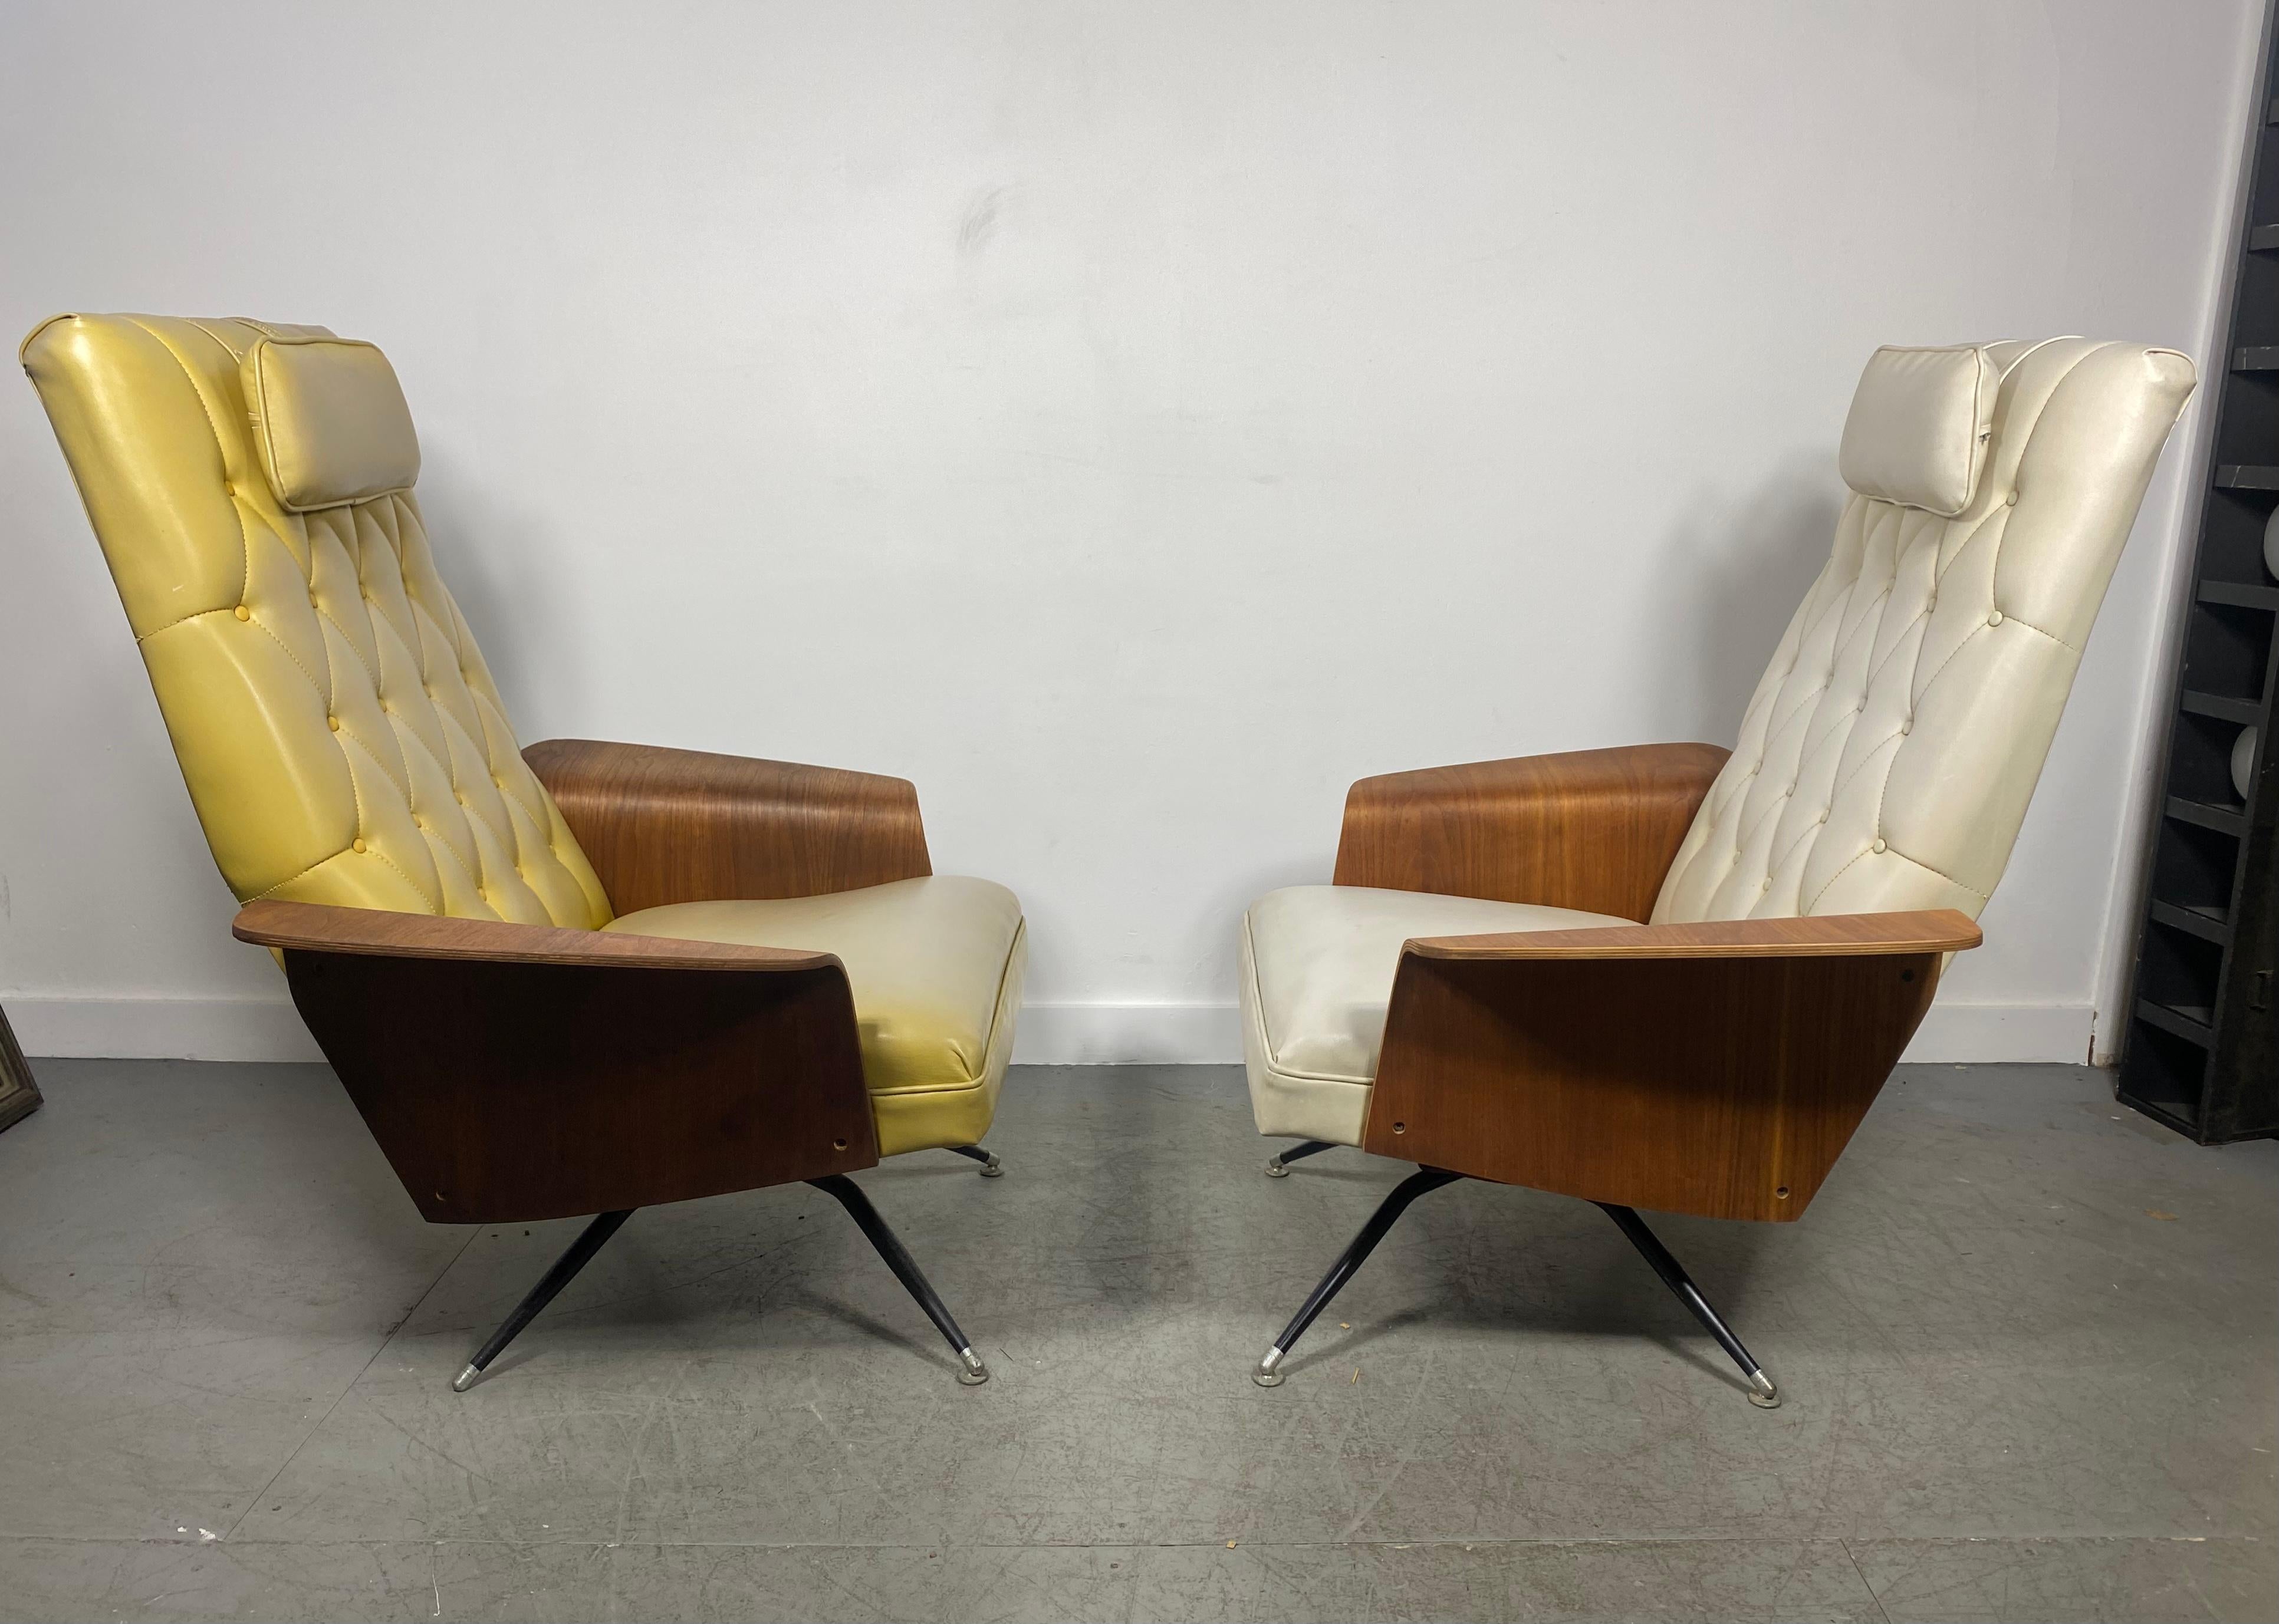 Mid-20th Century 1960s Modernist Tilt / Swivel Lounge Chairs Designed by Murphy Miller, Plycraft For Sale